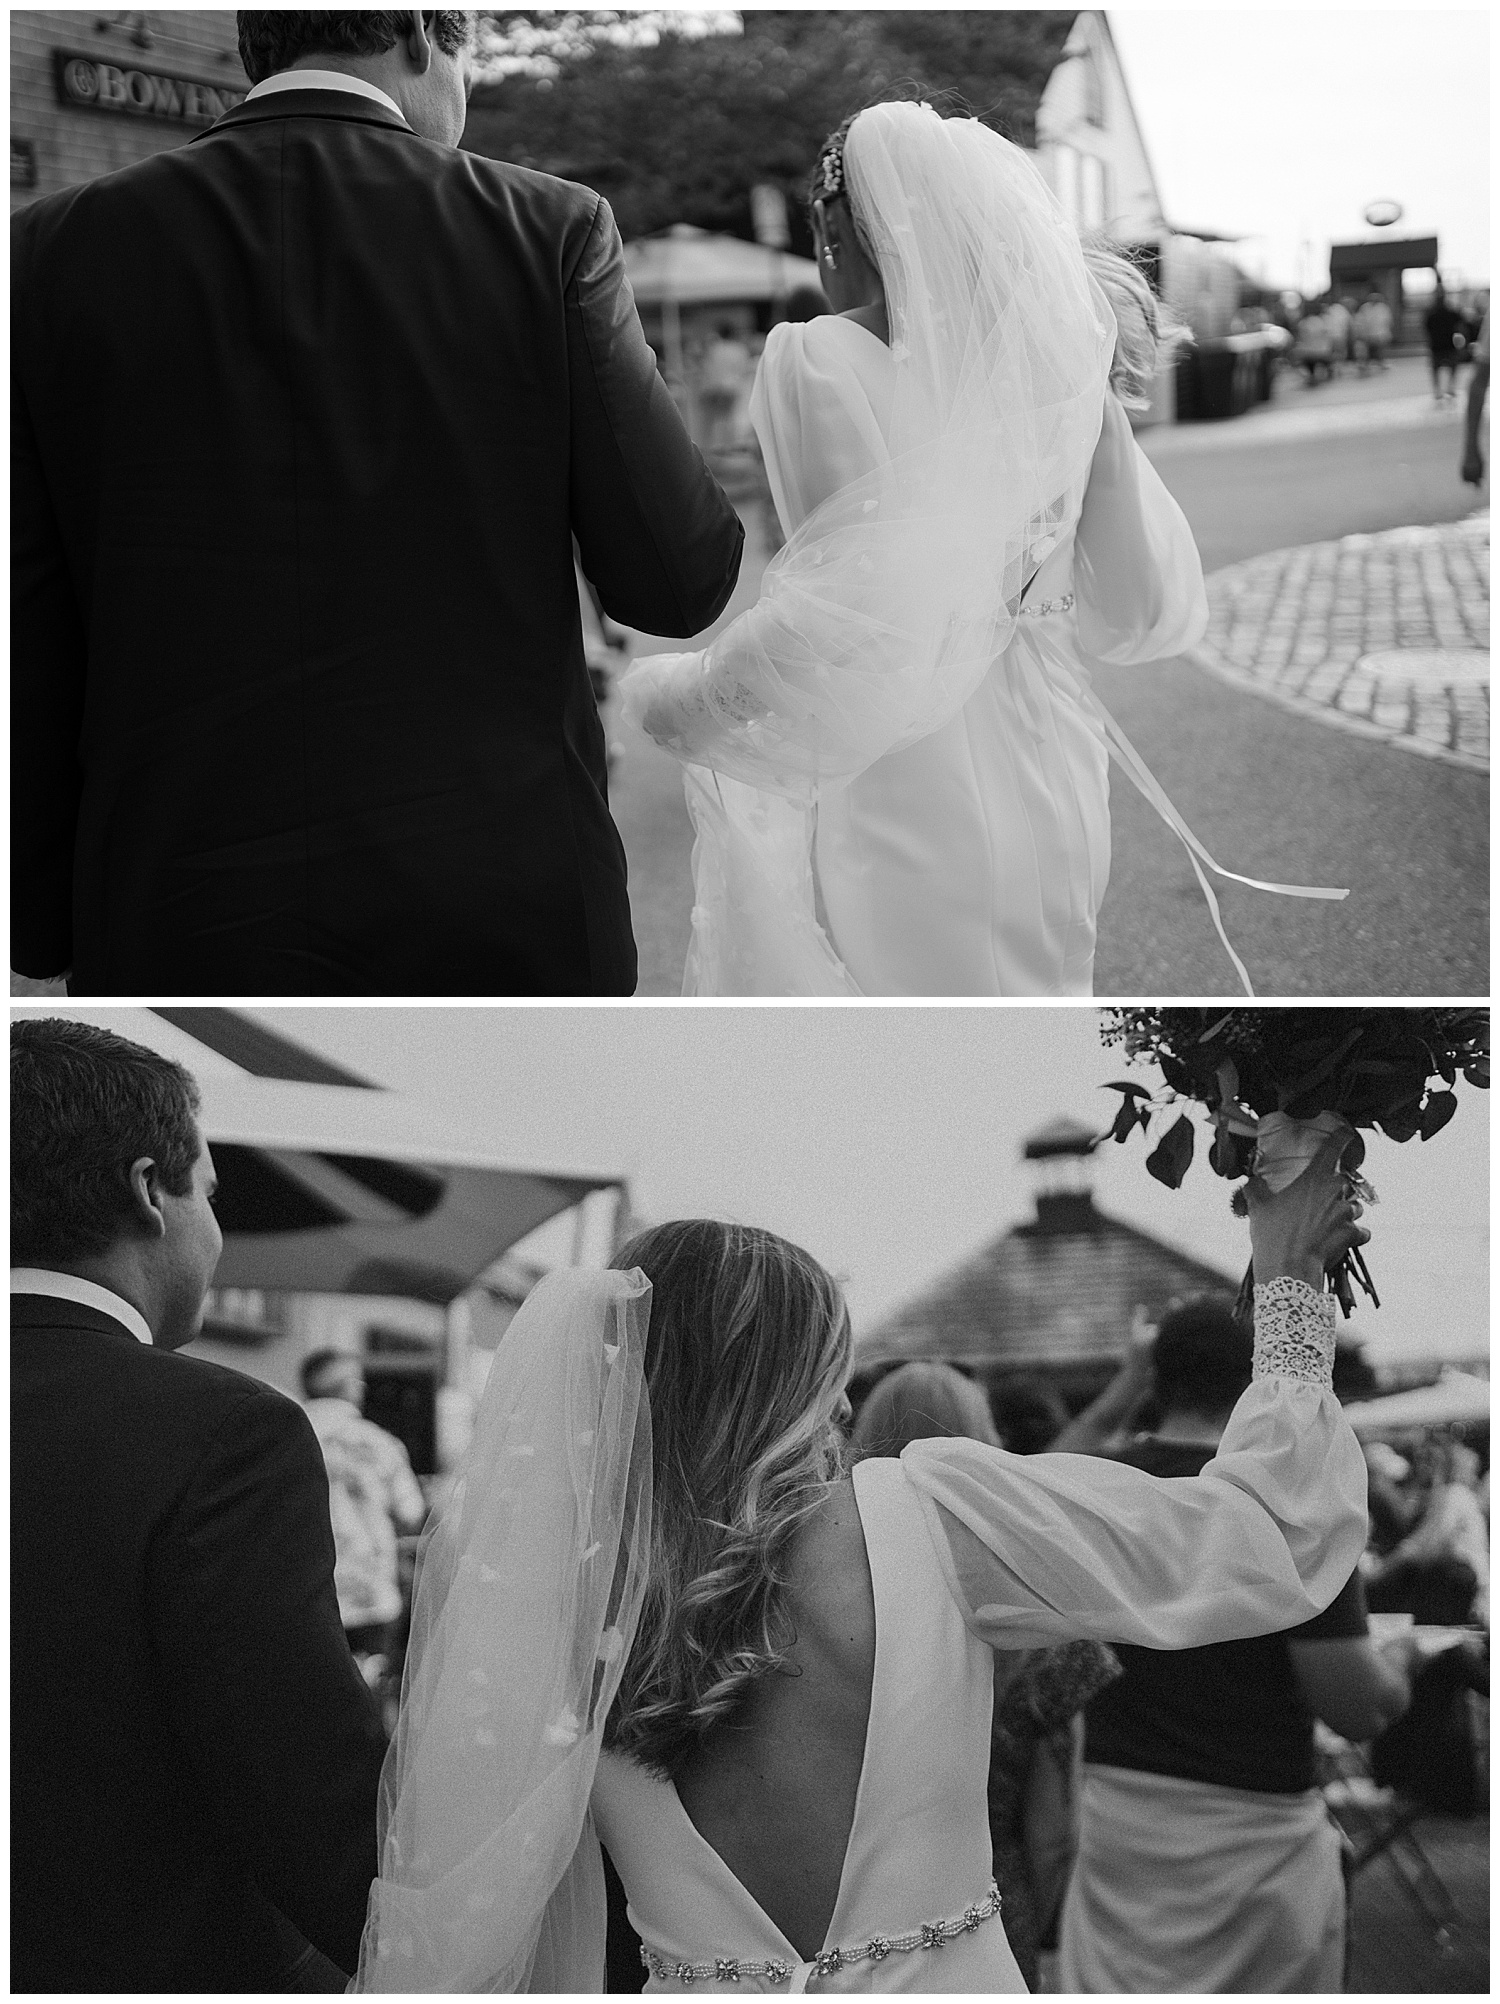 Black and White candids of Chic downtown Newport wedding on walk to venue